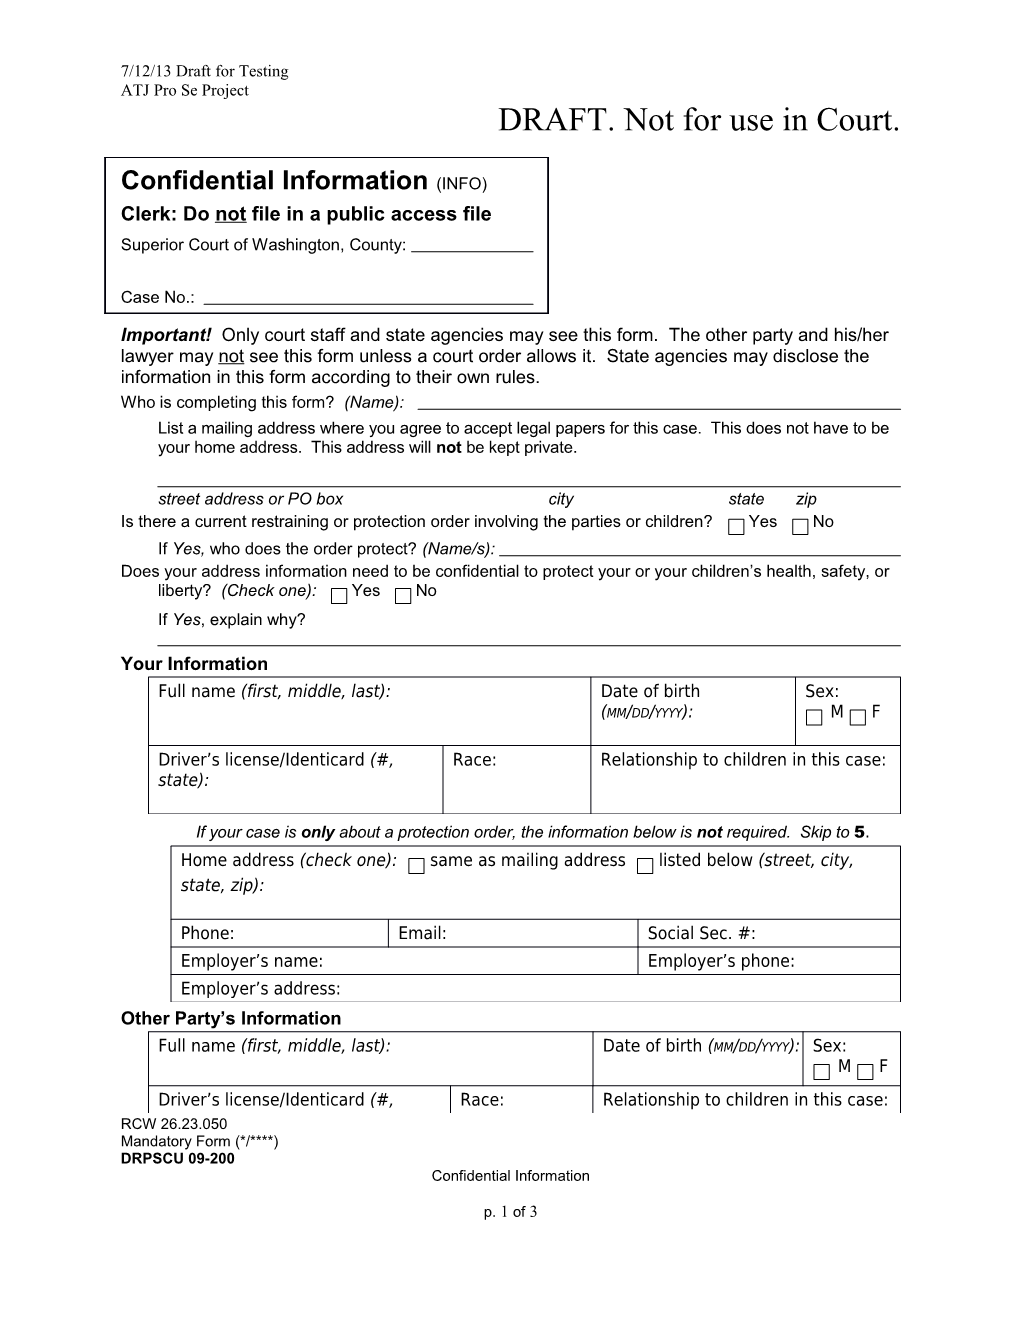 1.Who Is Completing This Form? (Name)